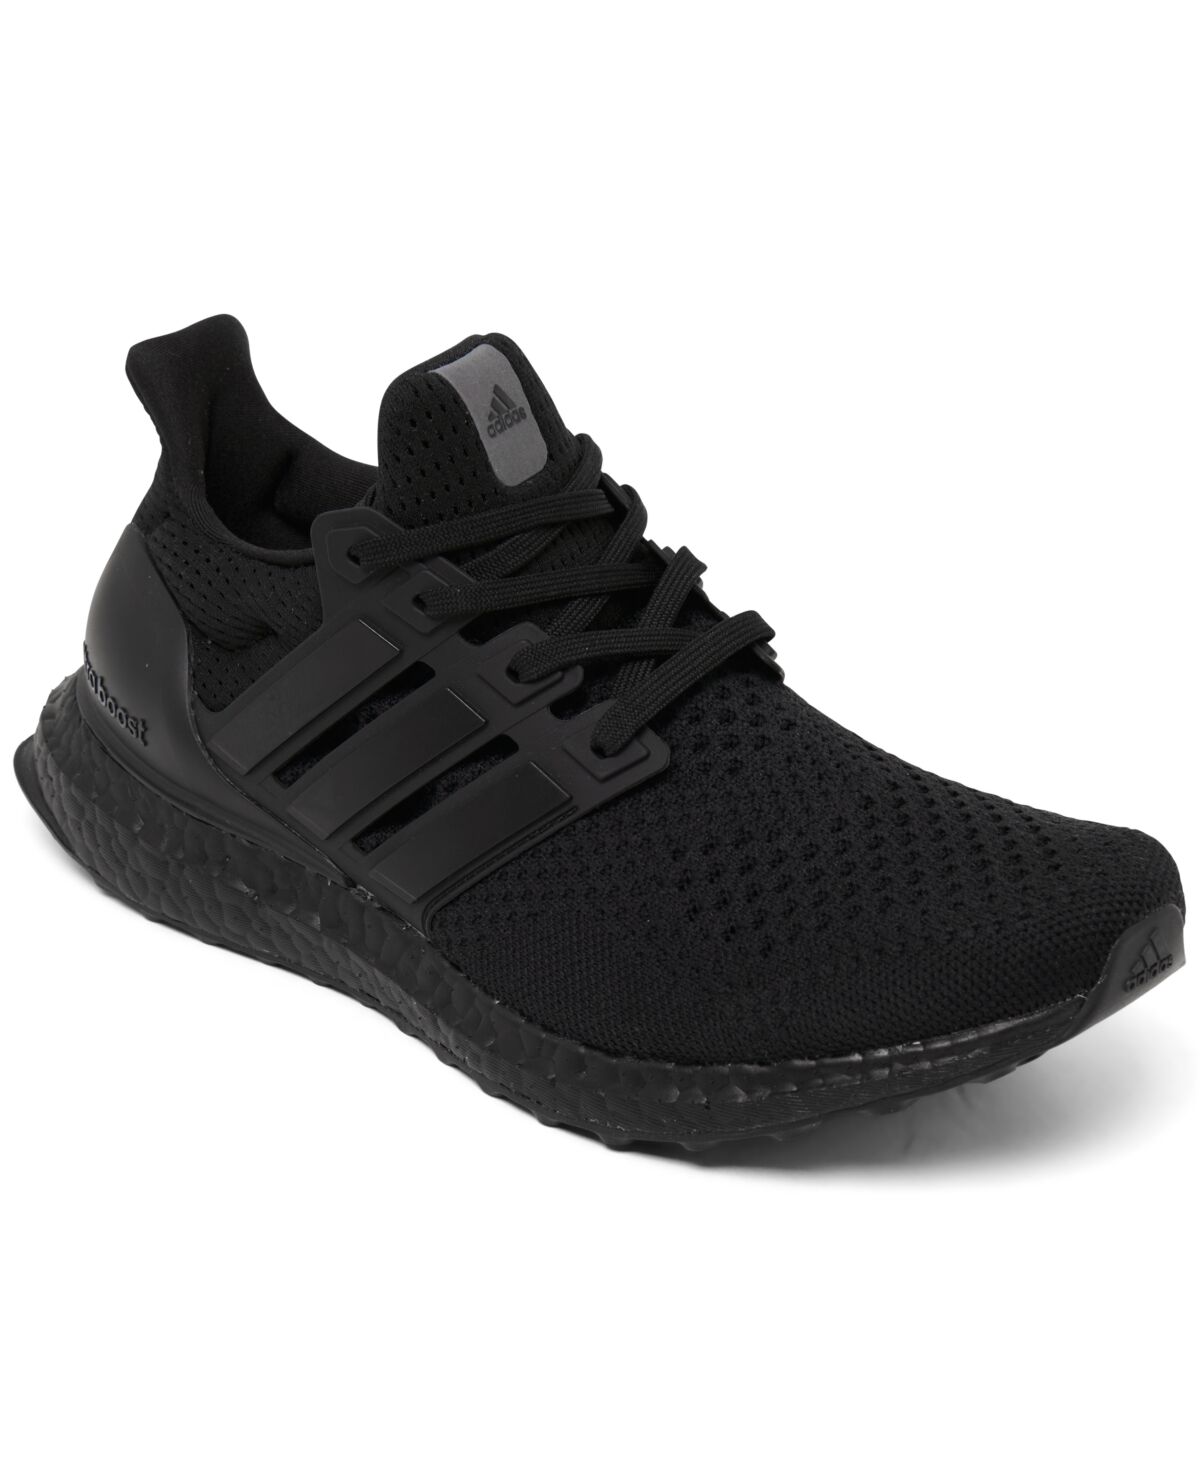 adidas Women's UltraBOOST 1.0 Running Sneakers from Finish Line - Core Black